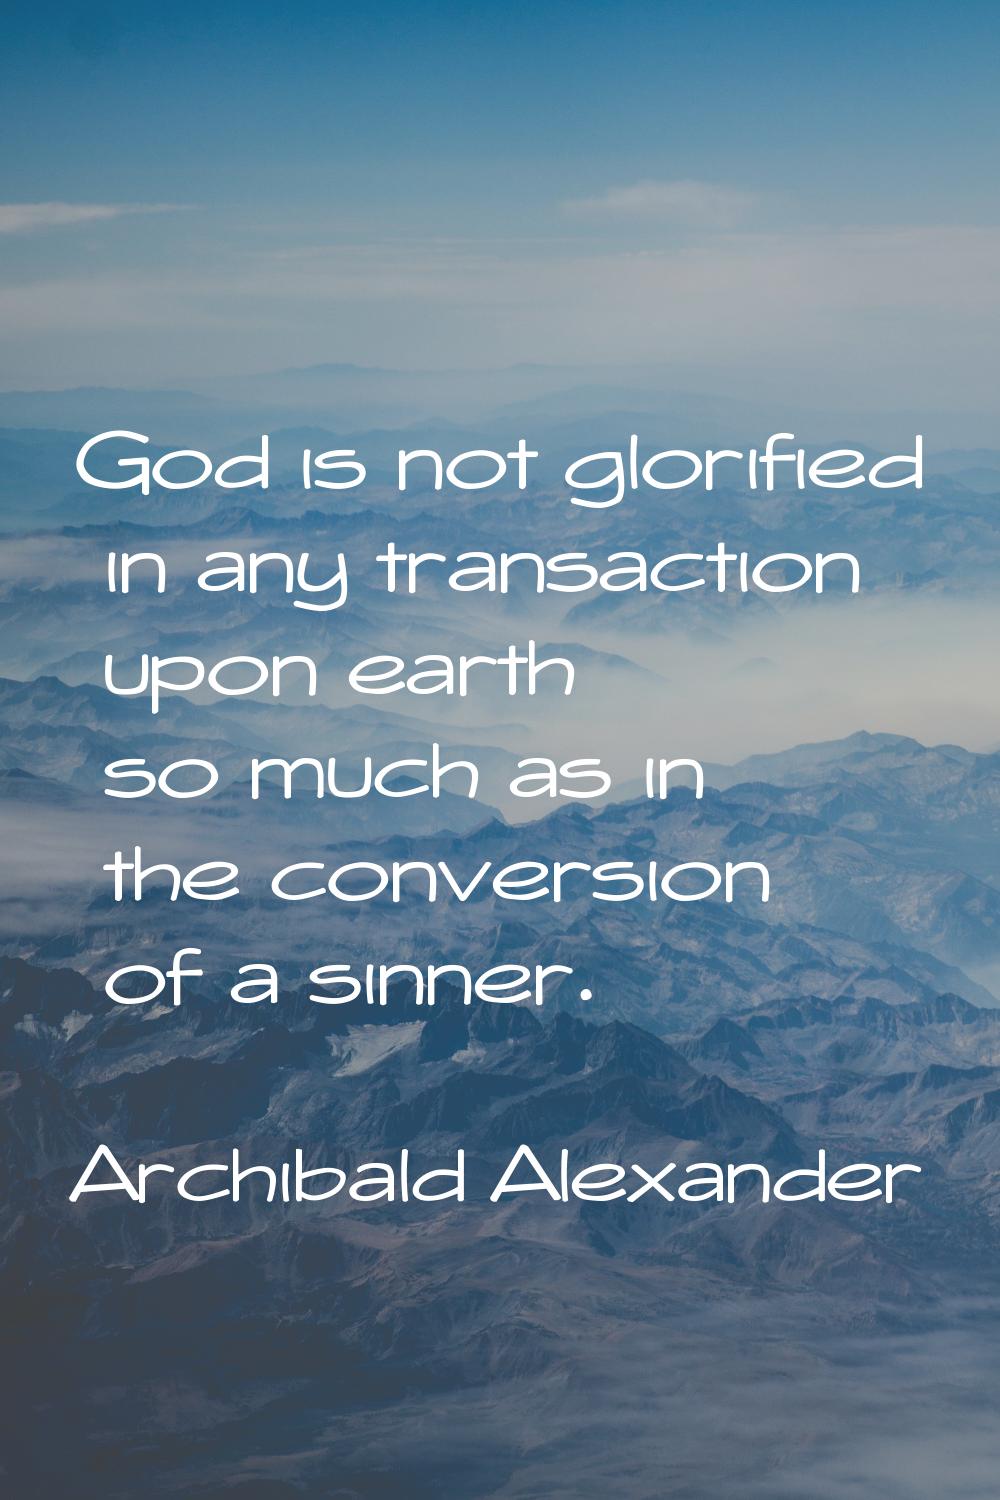 God is not glorified in any transaction upon earth so much as in the conversion of a sinner.